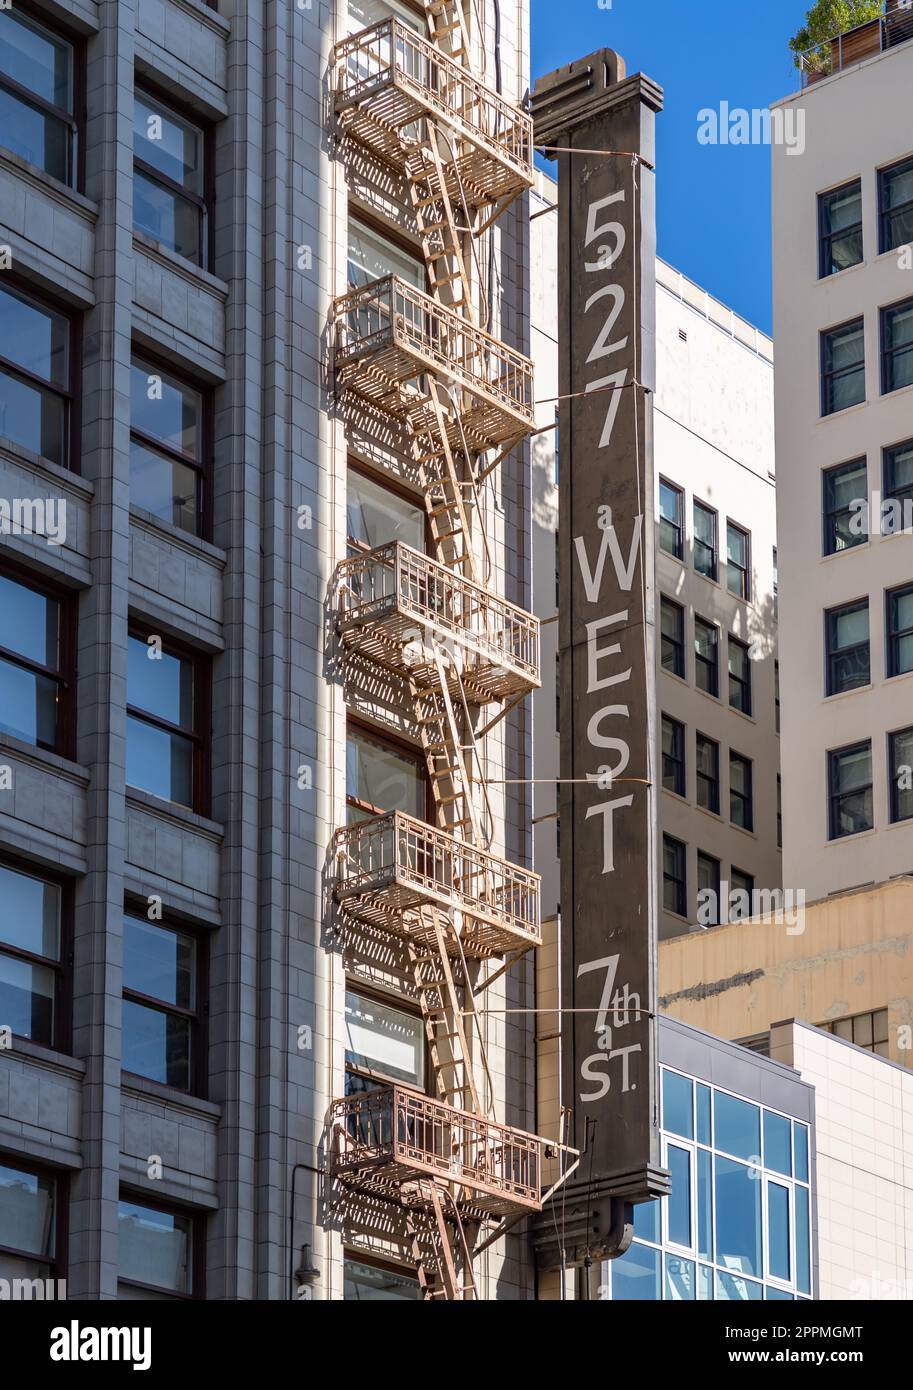 527 West 7th Street Sign and Fire Escape Foto Stock